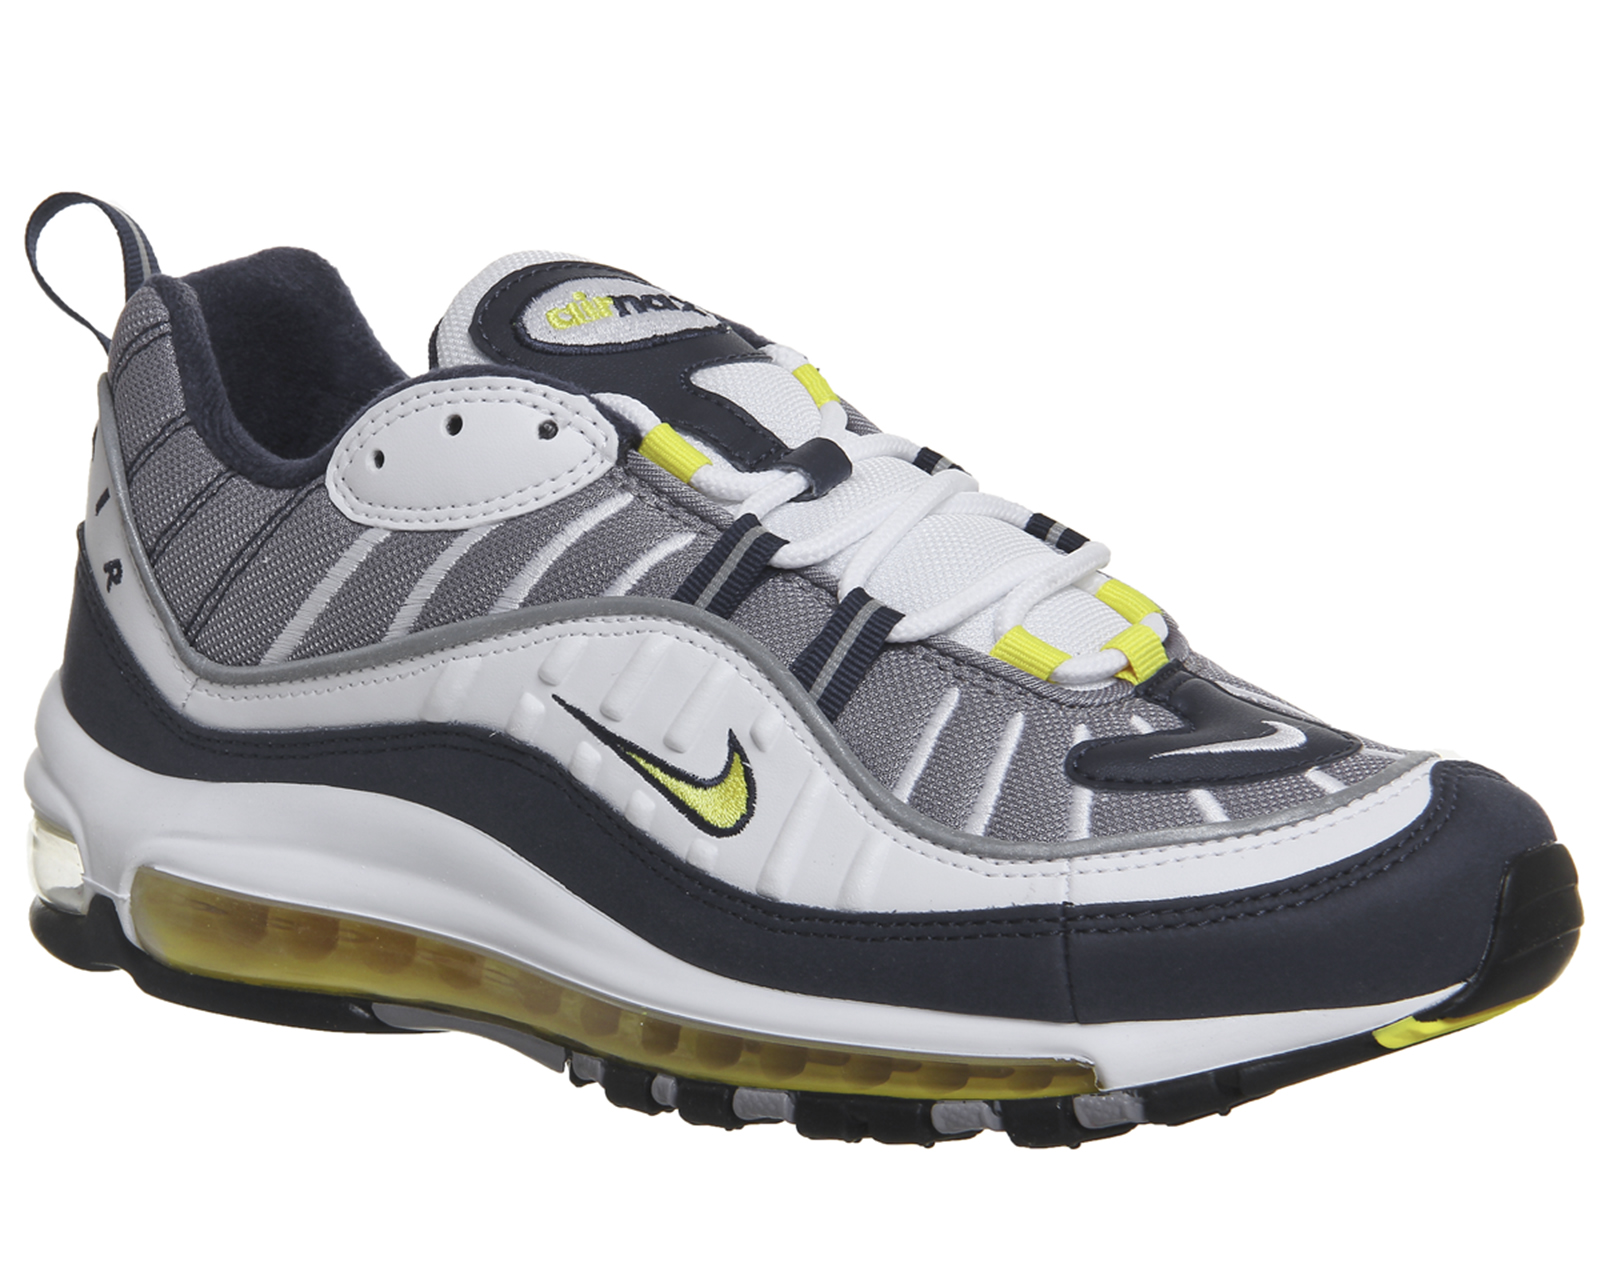 Nike Air Max 98 Trainers White Tour Yellow Midnight Navy - His trainers